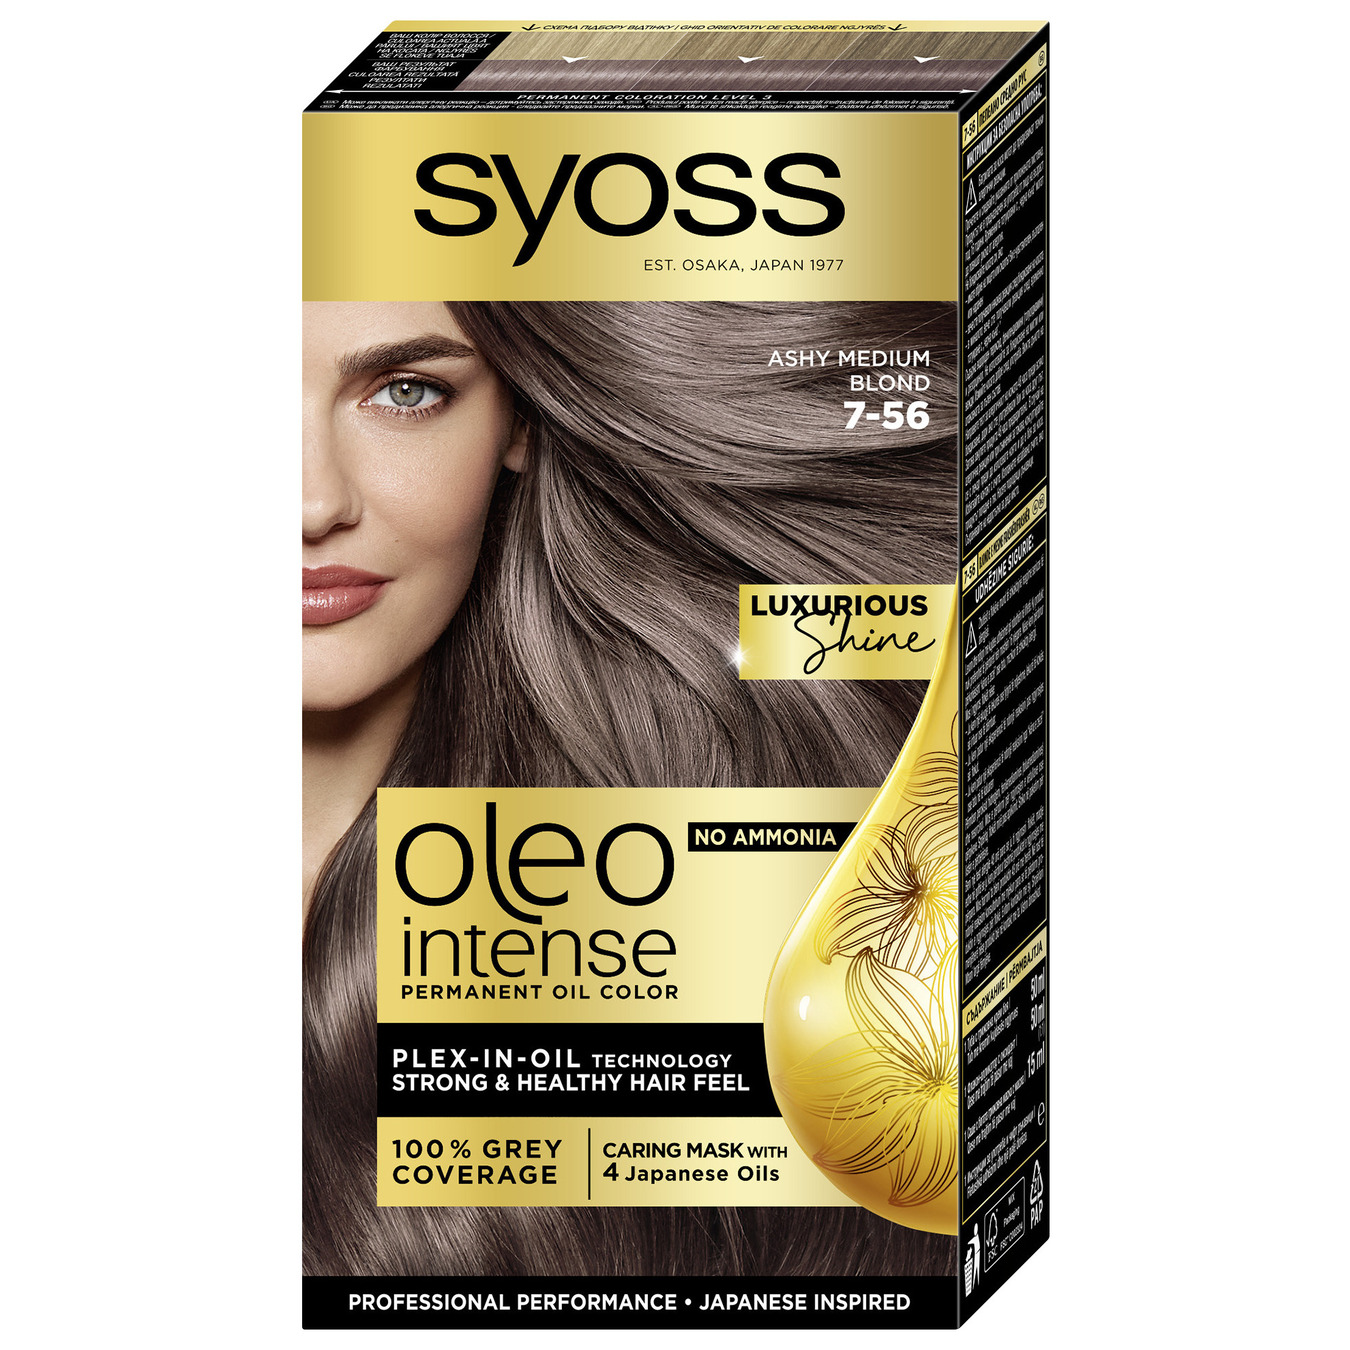 Syoss Hair conditioner Oleo Intense 7-56 cold blond